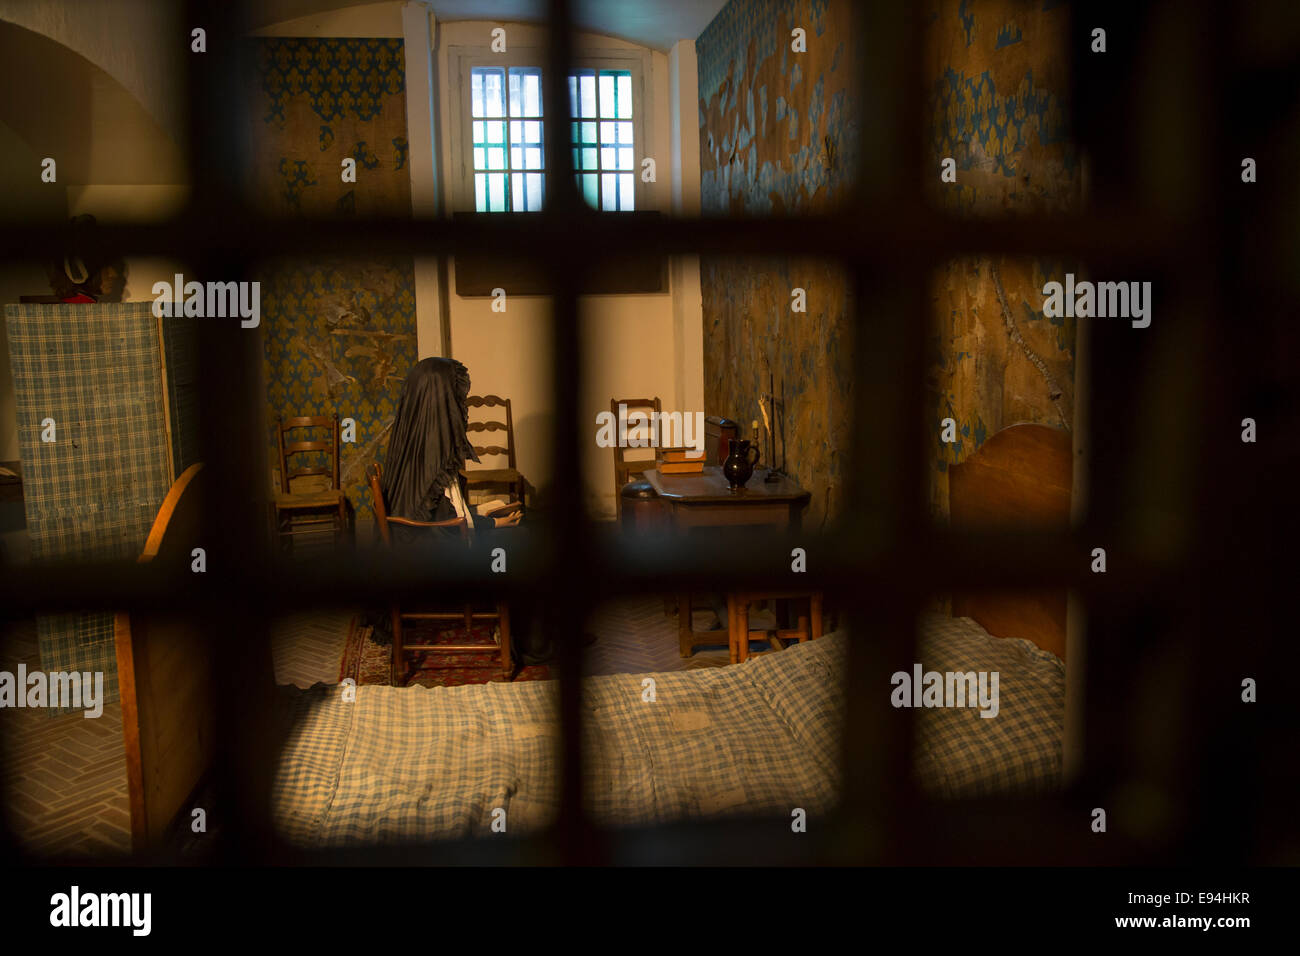 View through the guards viewing window to Marie Antoinette's recreated cell at the Conciergerie, Paris, France Stock Photo